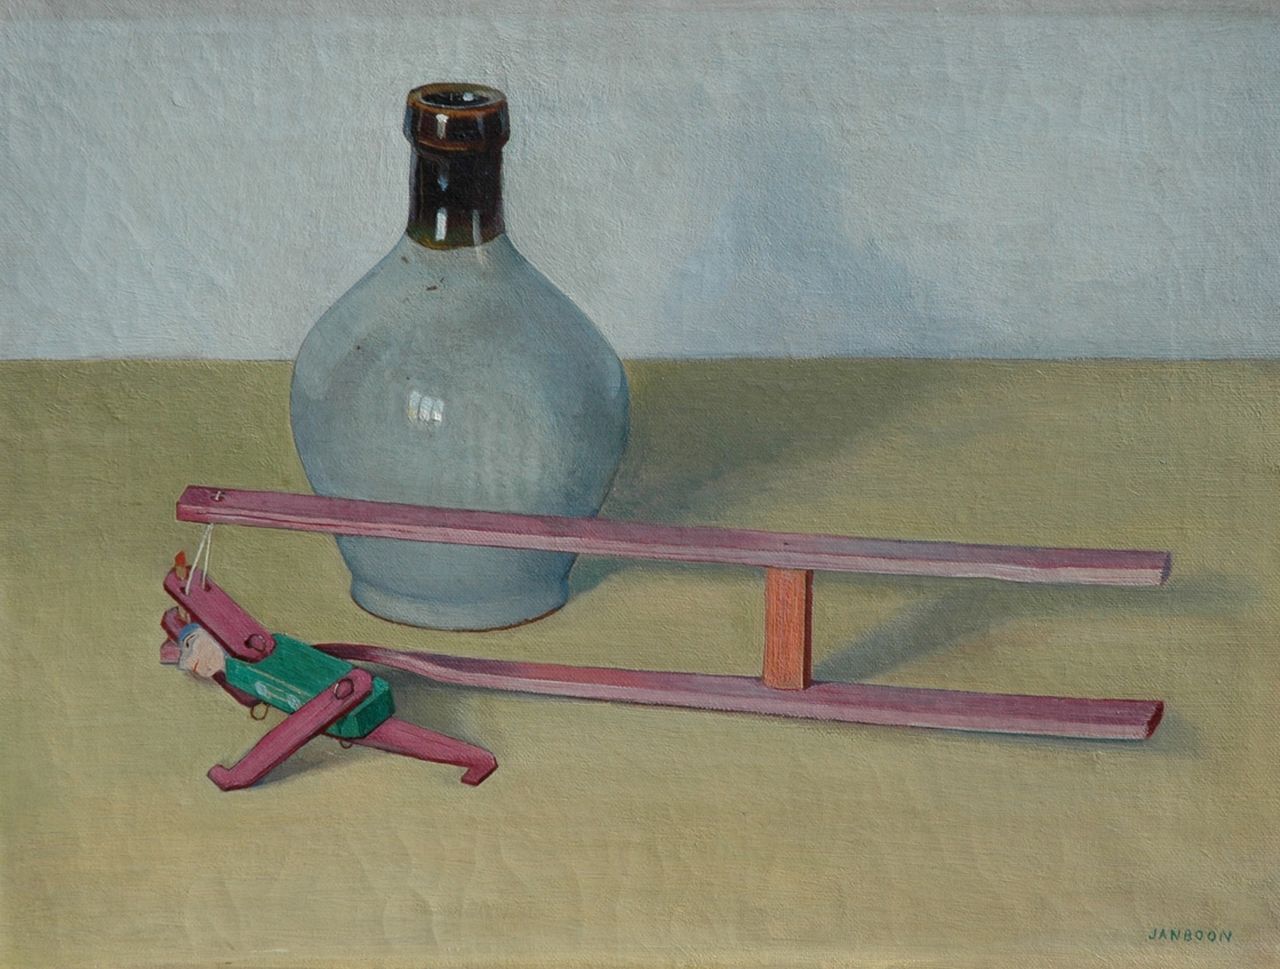 Boon J.  | Jan Boon, A still life with a jug and a toy, oil on canvas 30.2 x 40.5 cm, signed l.r.